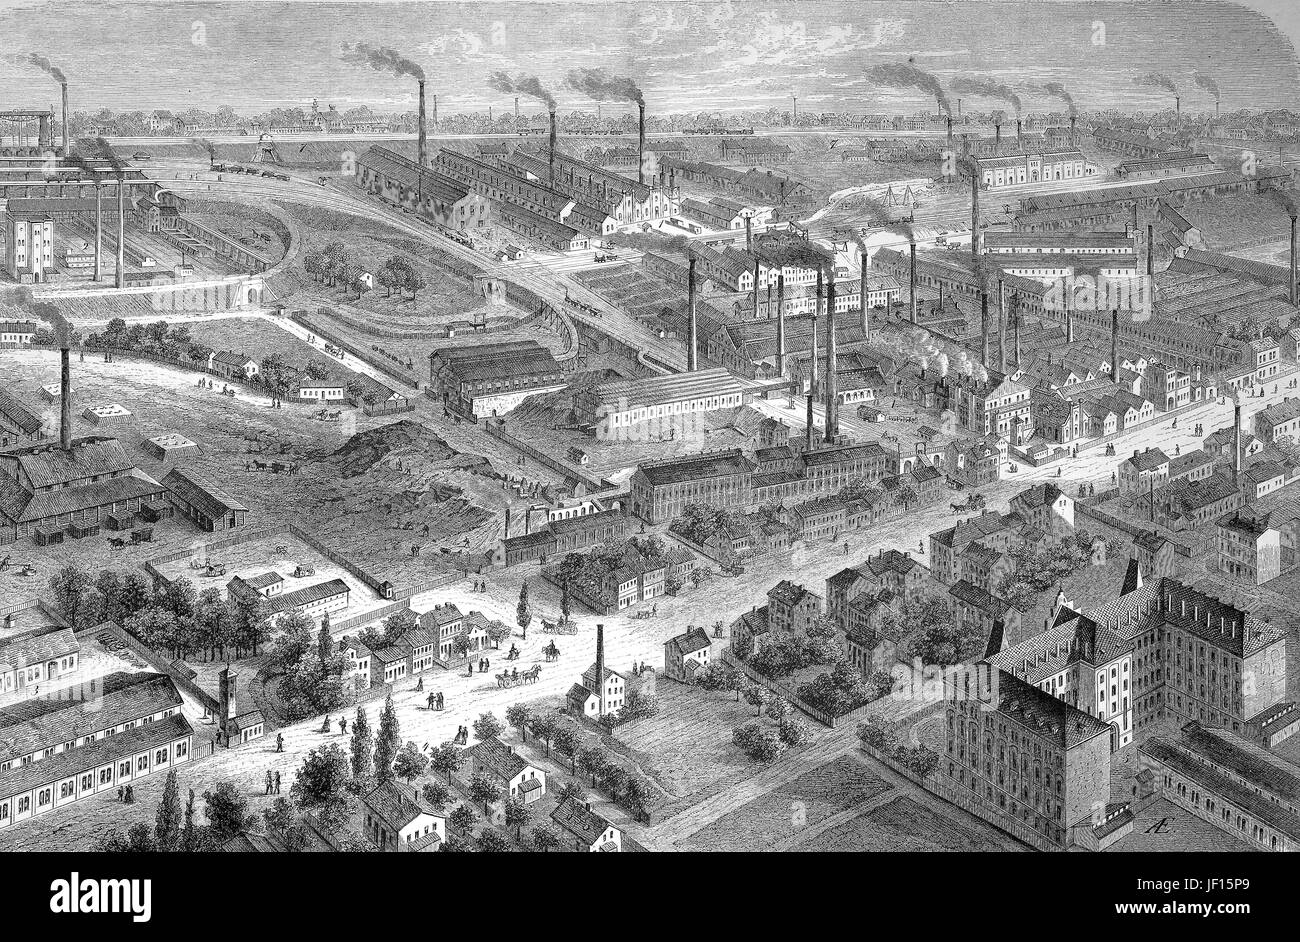 Historical illustration of the Bochumer Verein, a factory for the production of Crucible steel, Germany, Digital improved reproduction from an original print from 1888 Stock Photo